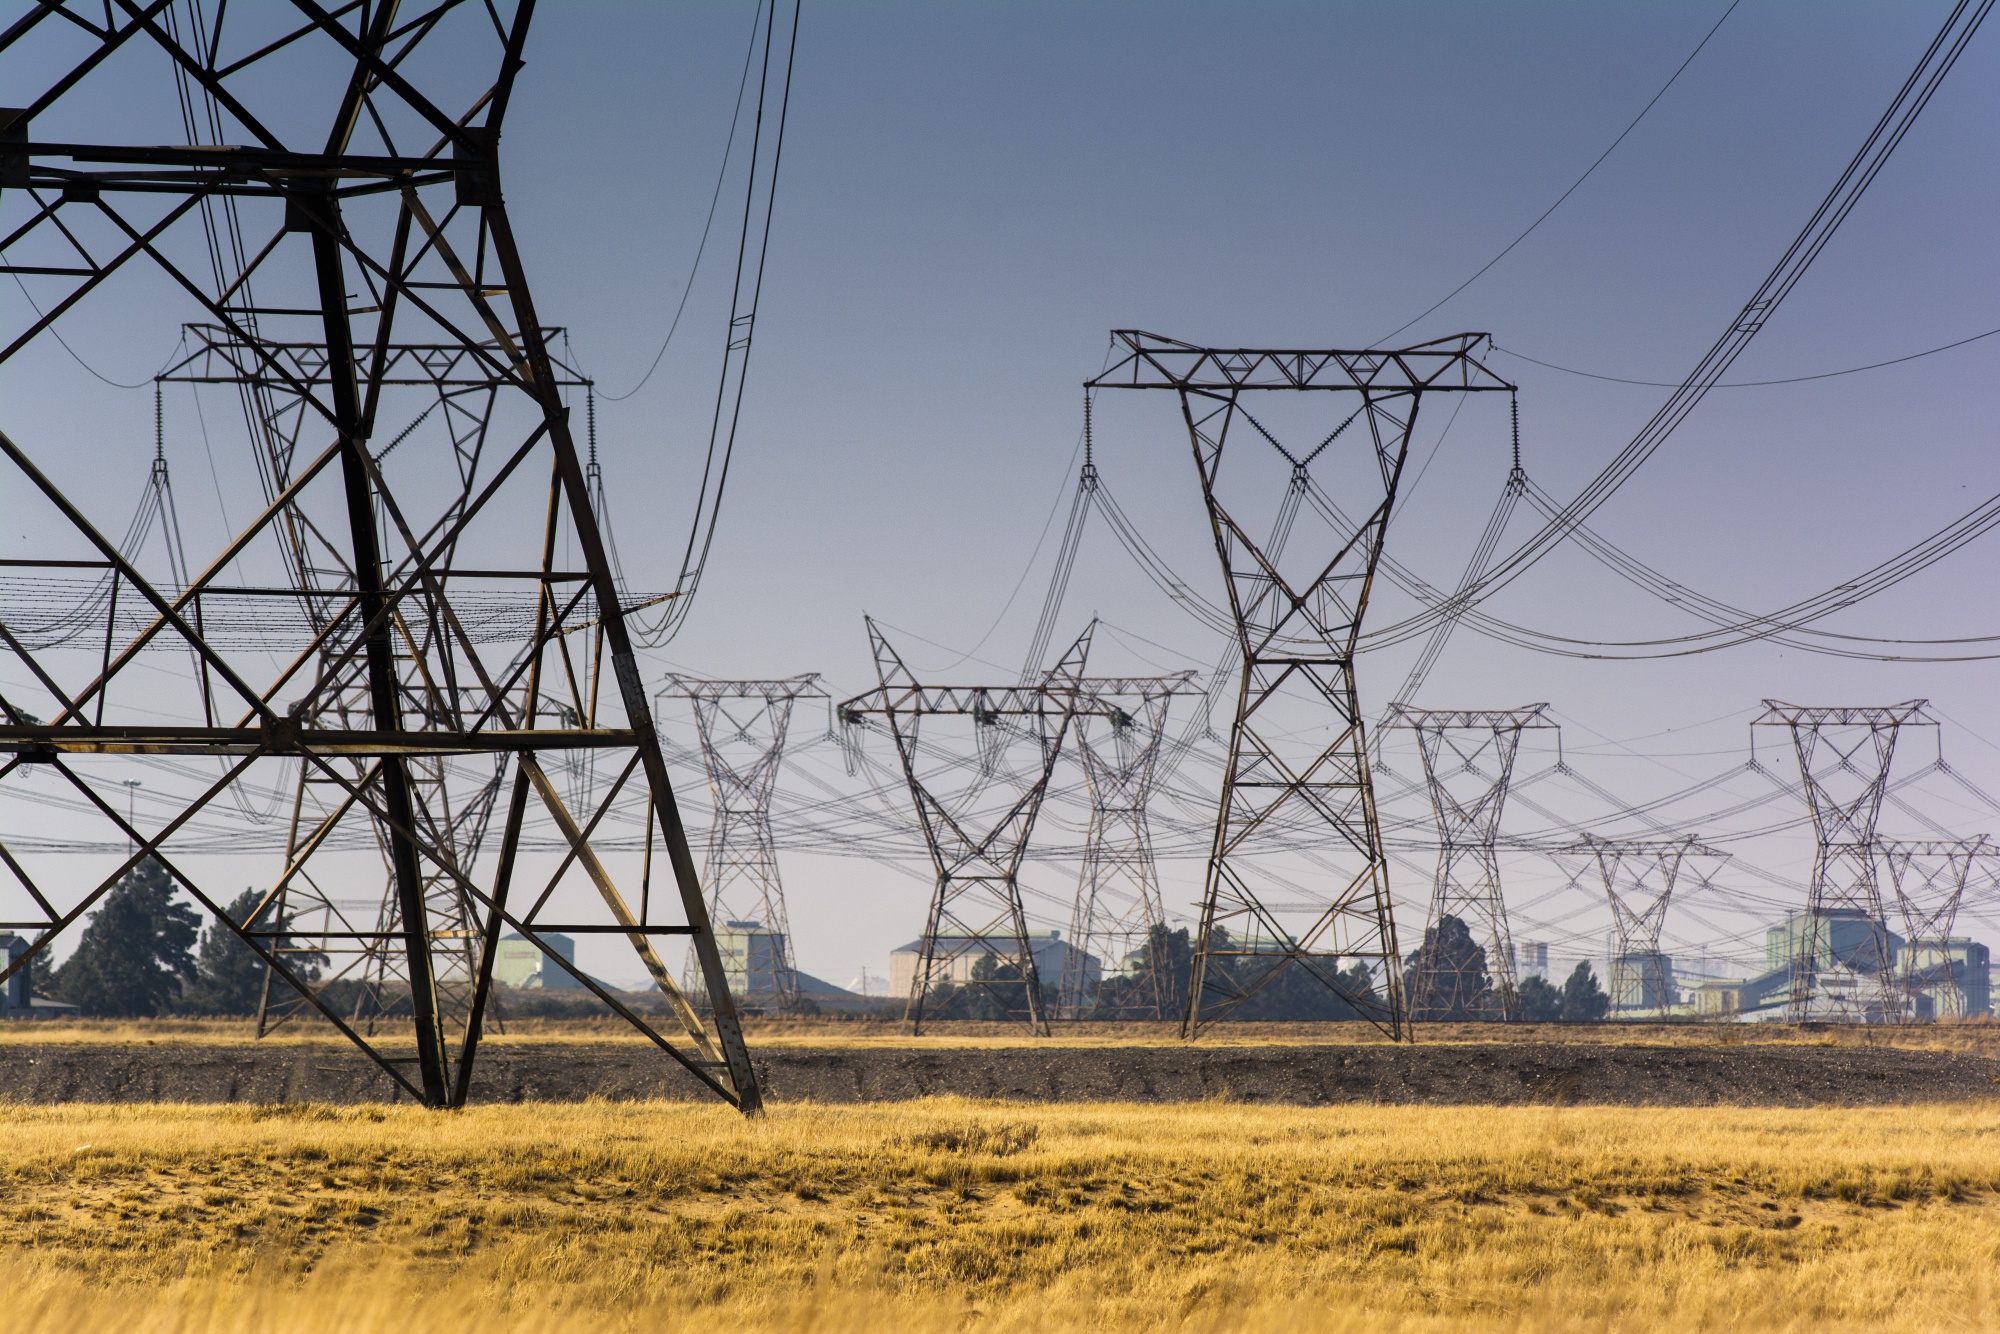 Electrical power lines hang from transmission pylons near an&nbsp;Eskom power station in Vereeniging, South Africa.